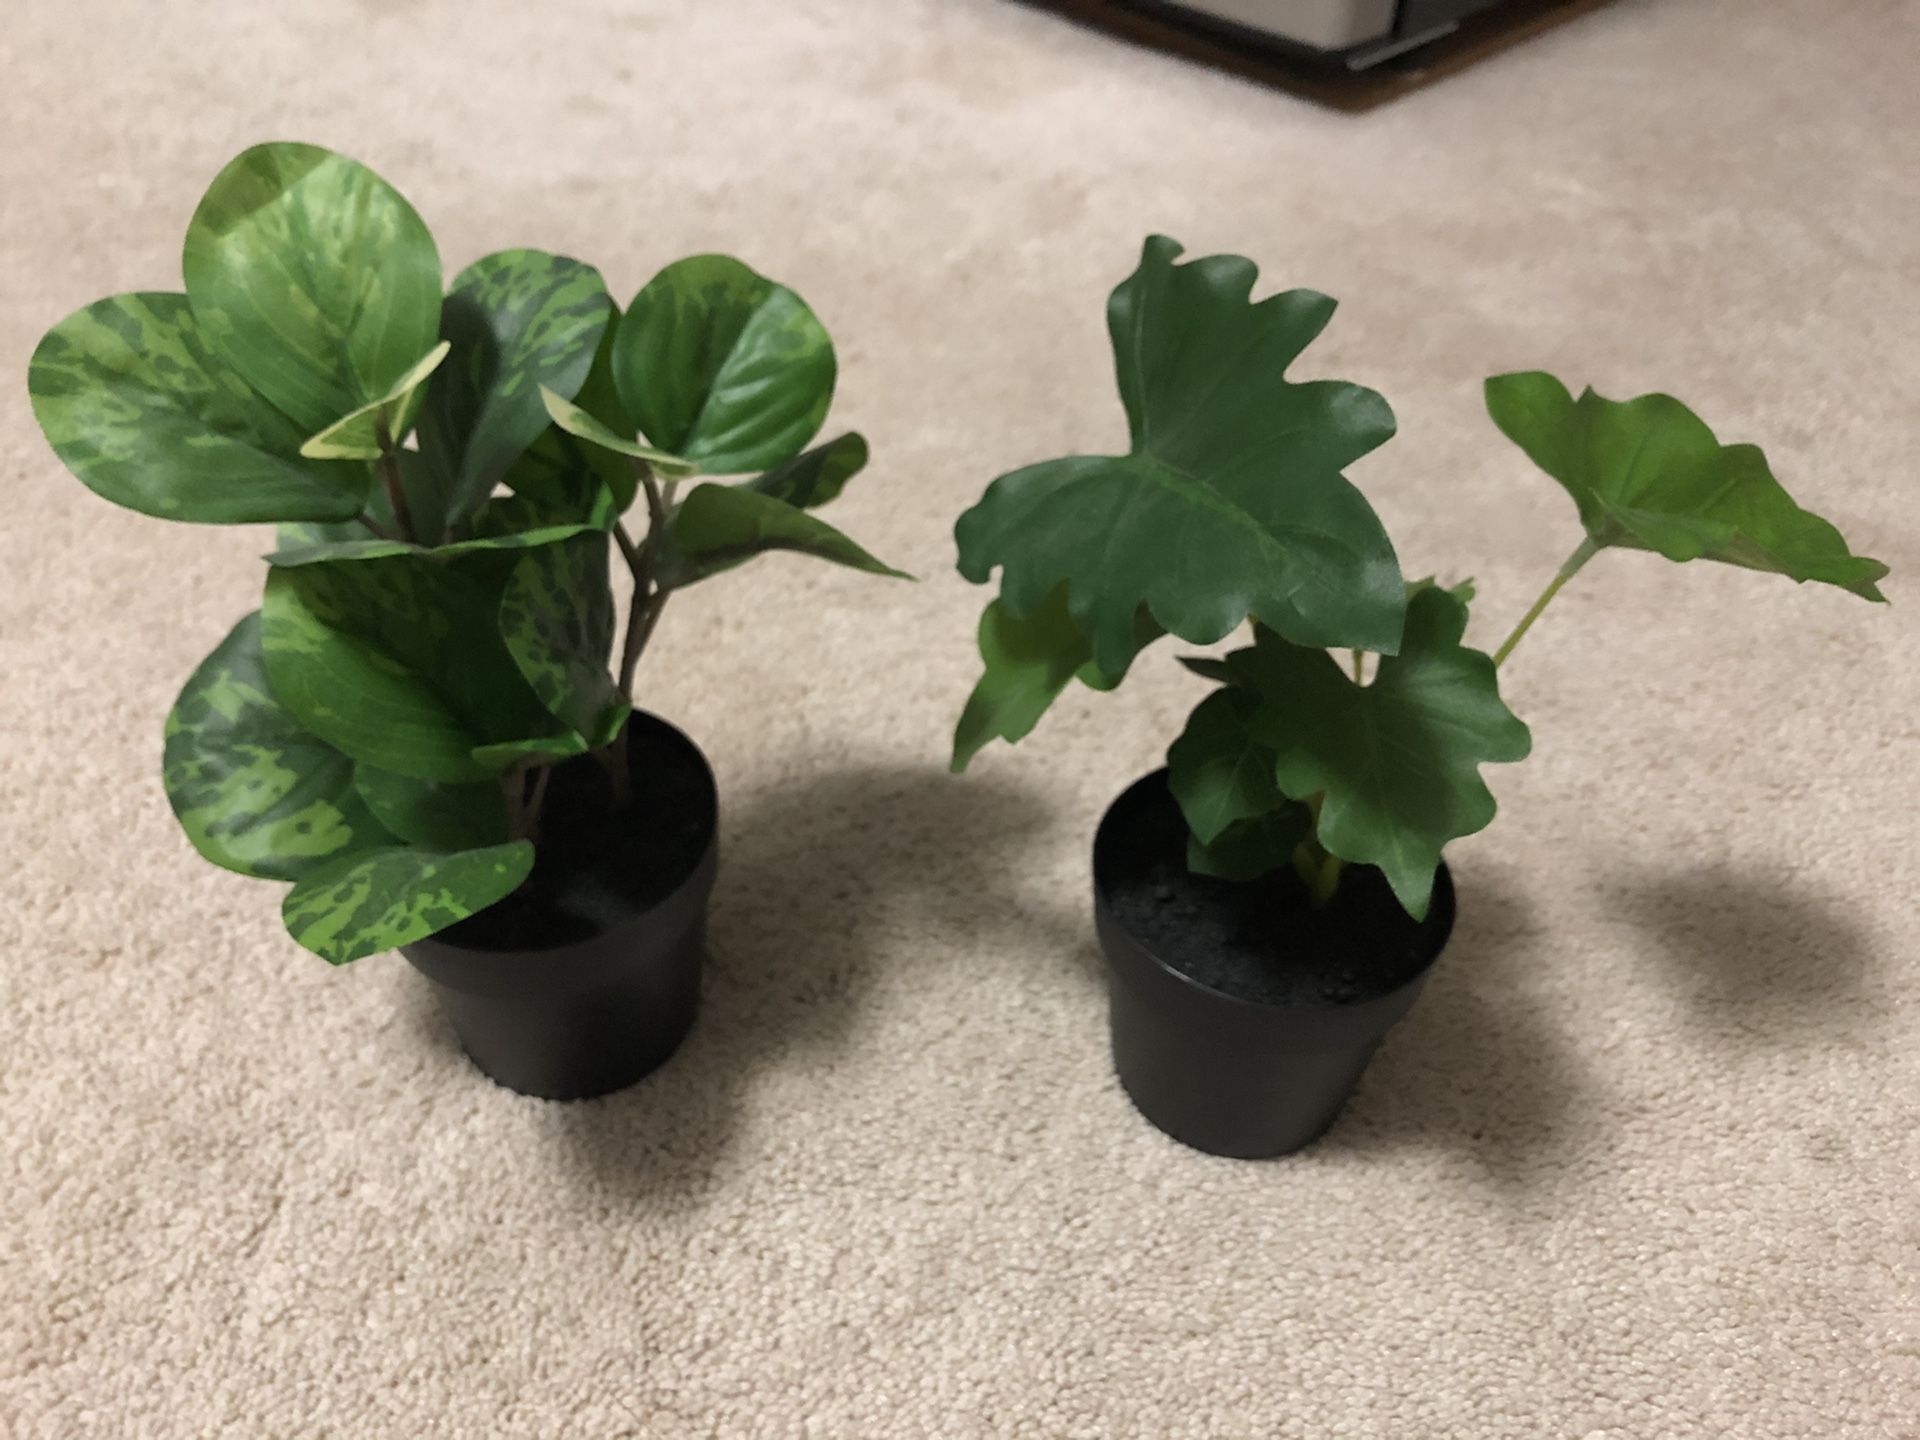 Fake plants - 8” tall - new, no dust